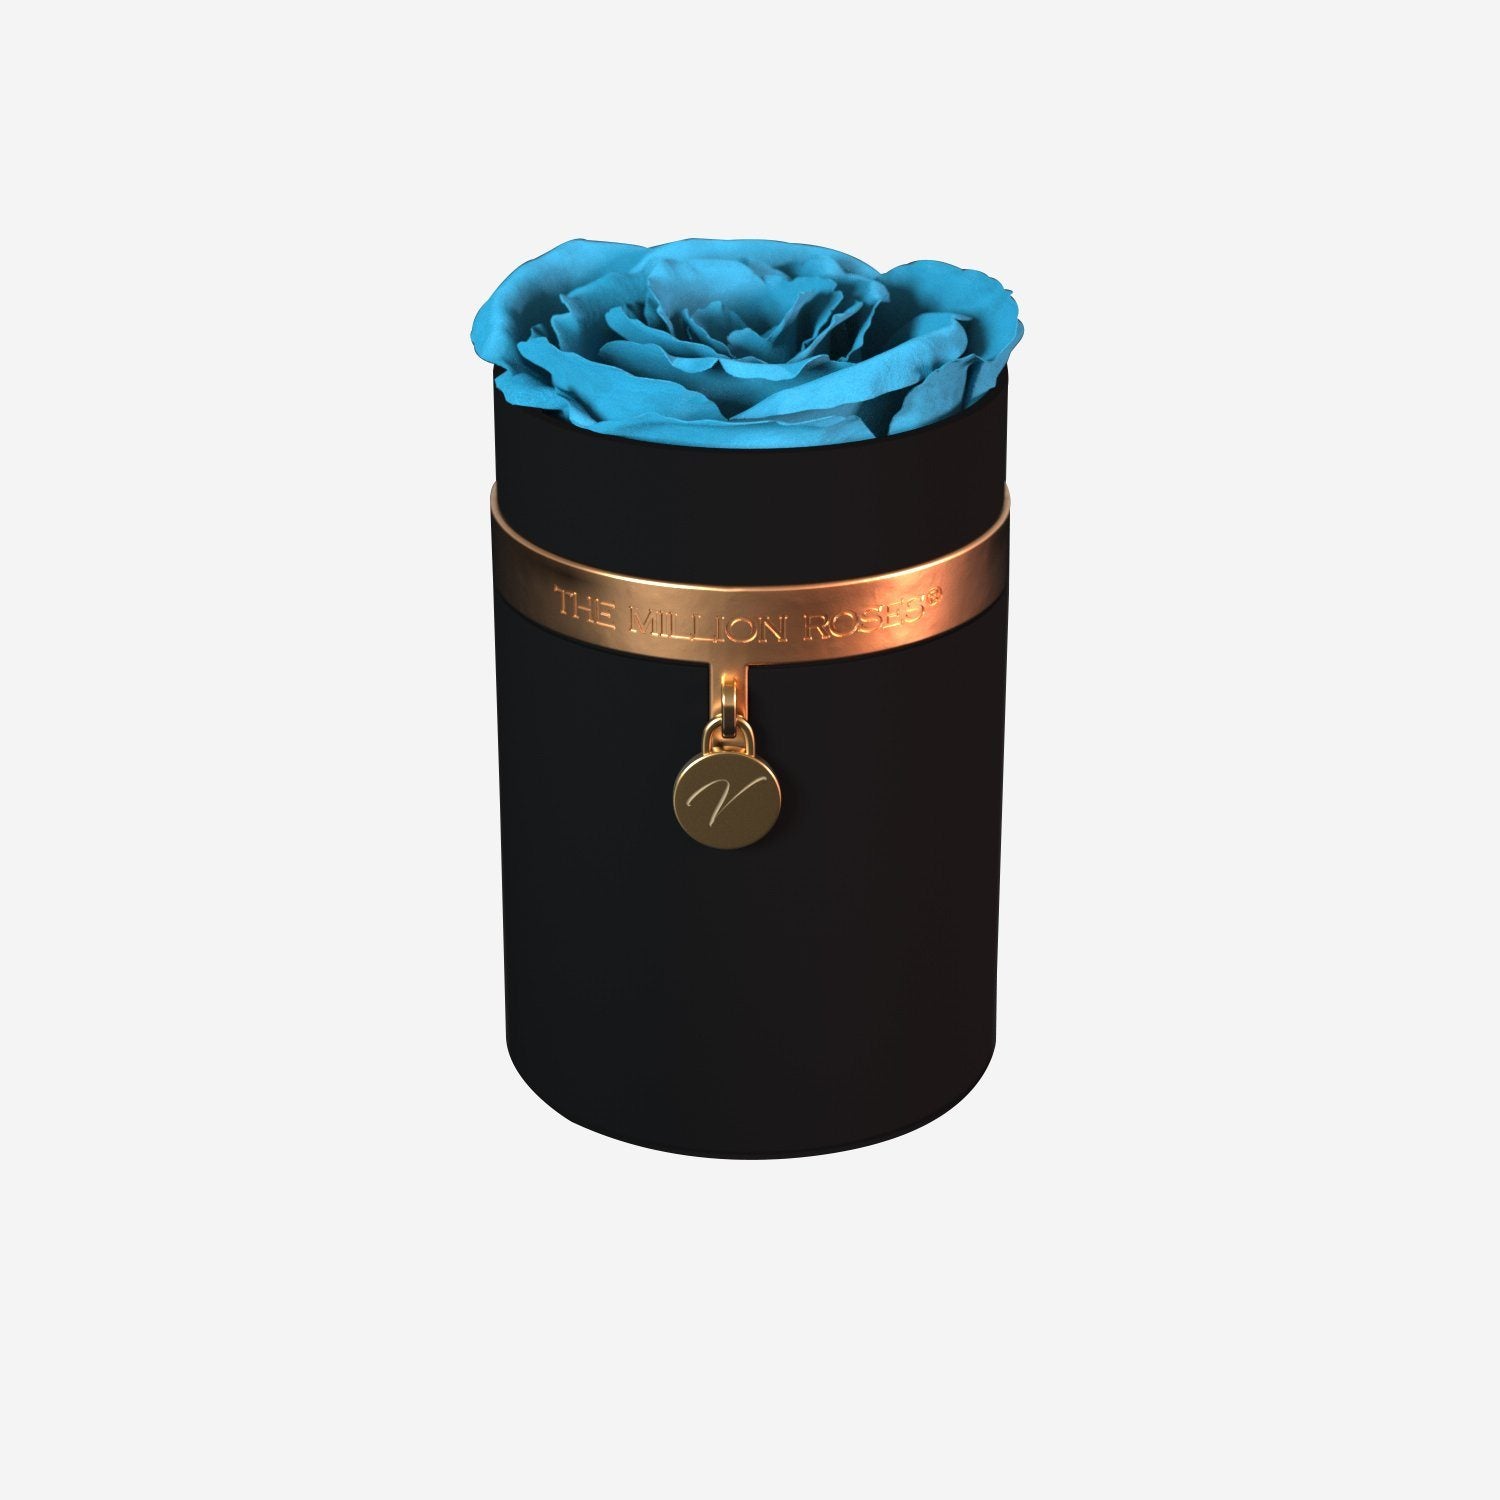 One in a Million™ Round Black Box | Charm Edition | Light Blue Rose - The Million Roses